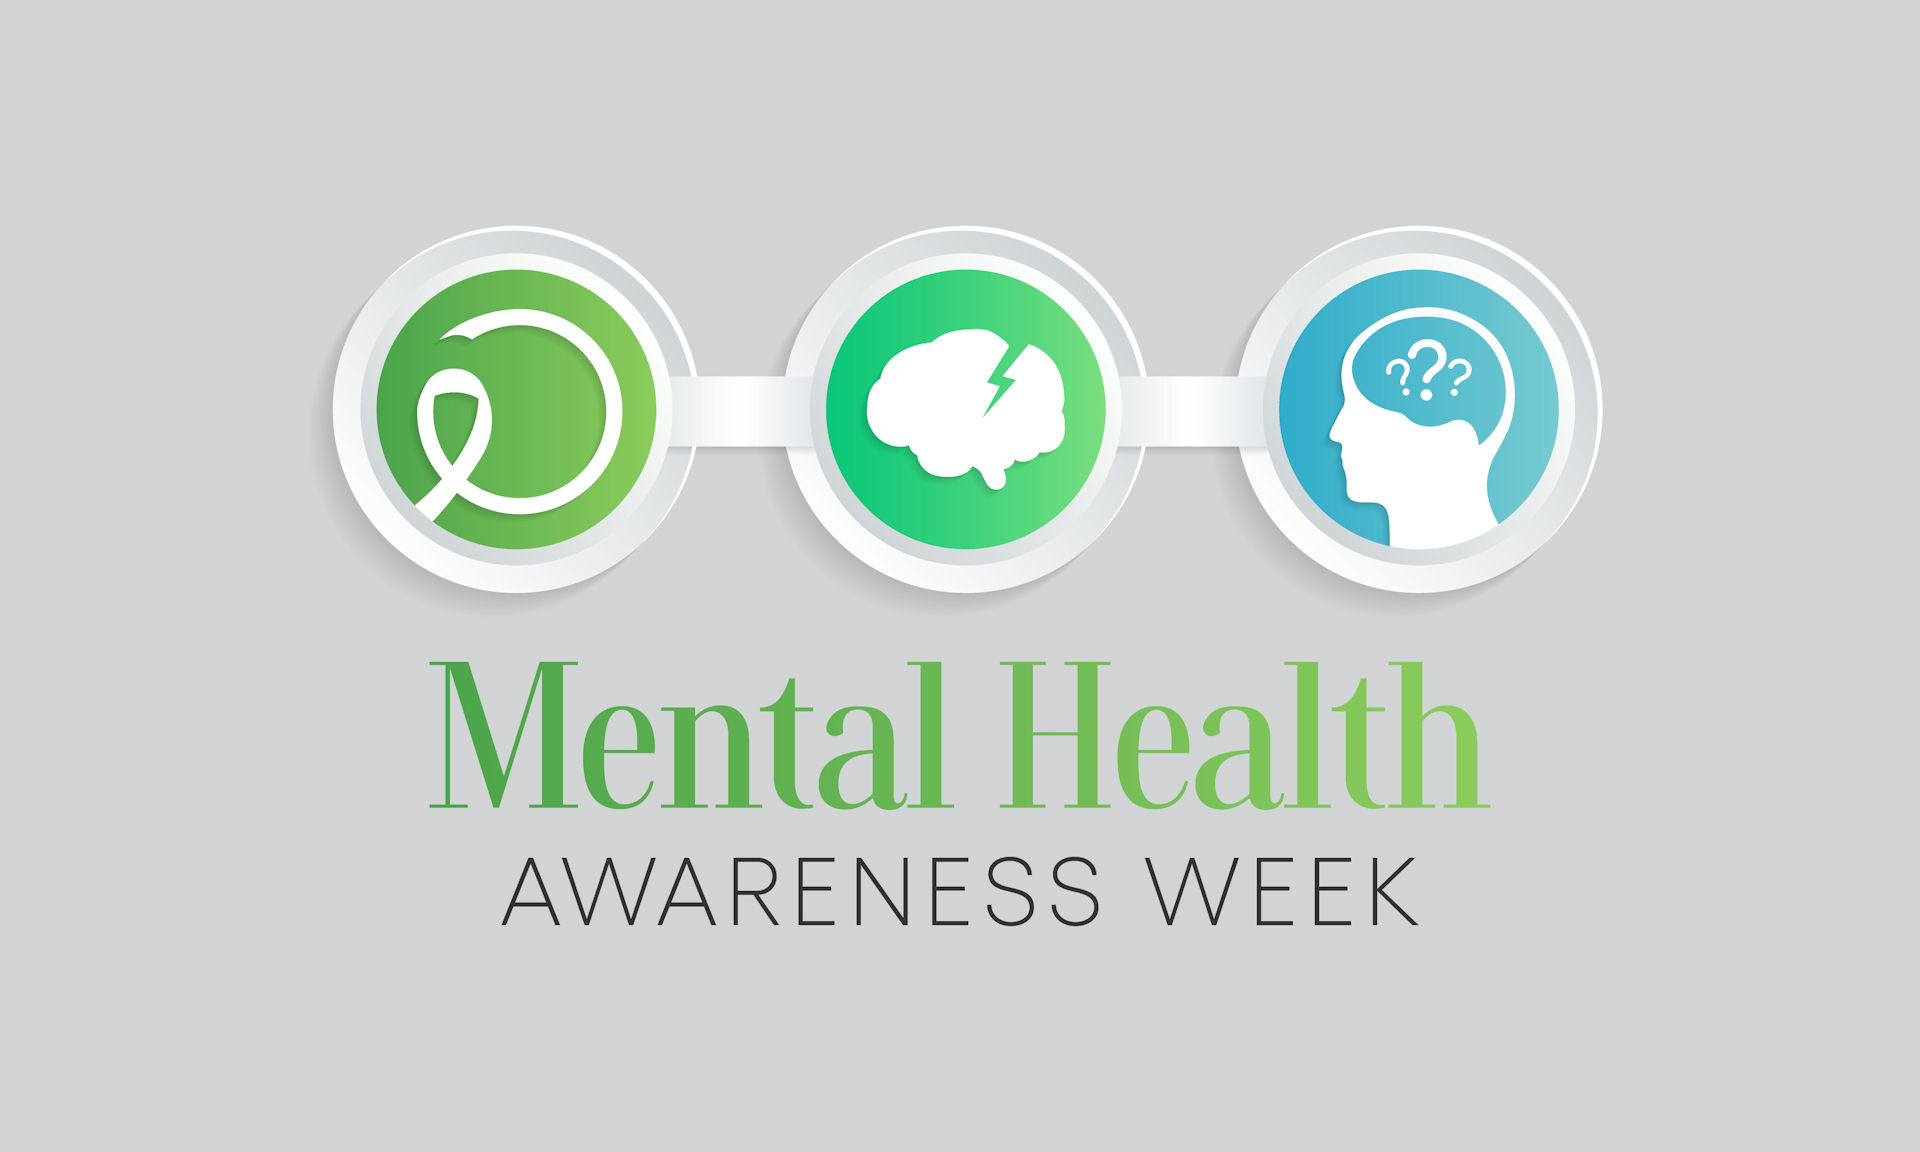 Mental Illness Awareness Week 2023 will be celebrated from October 1-7.